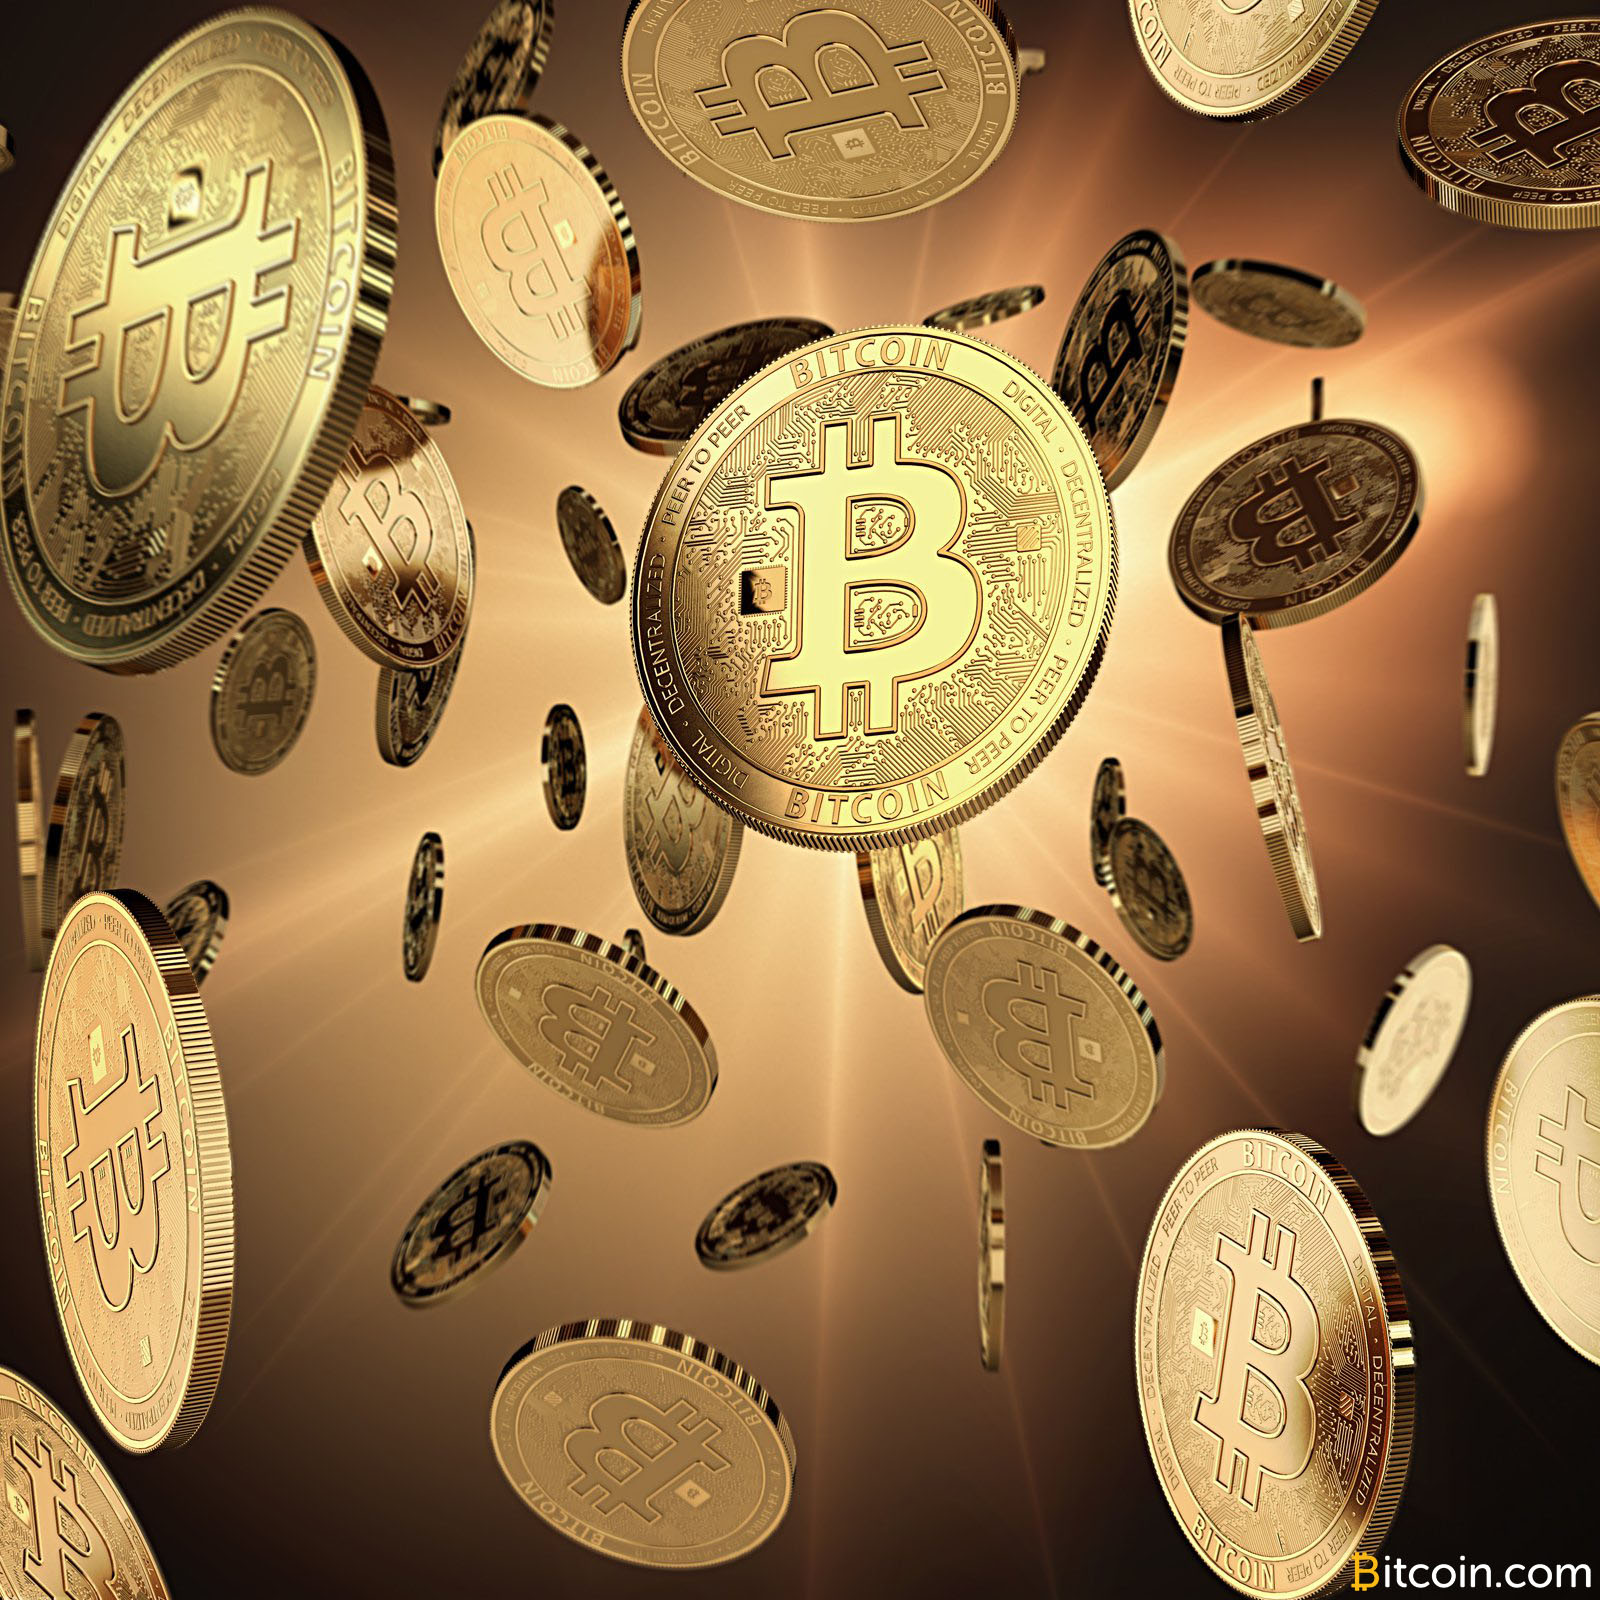 Financial Tycoons and Celebrities Weigh in on Bitcoin